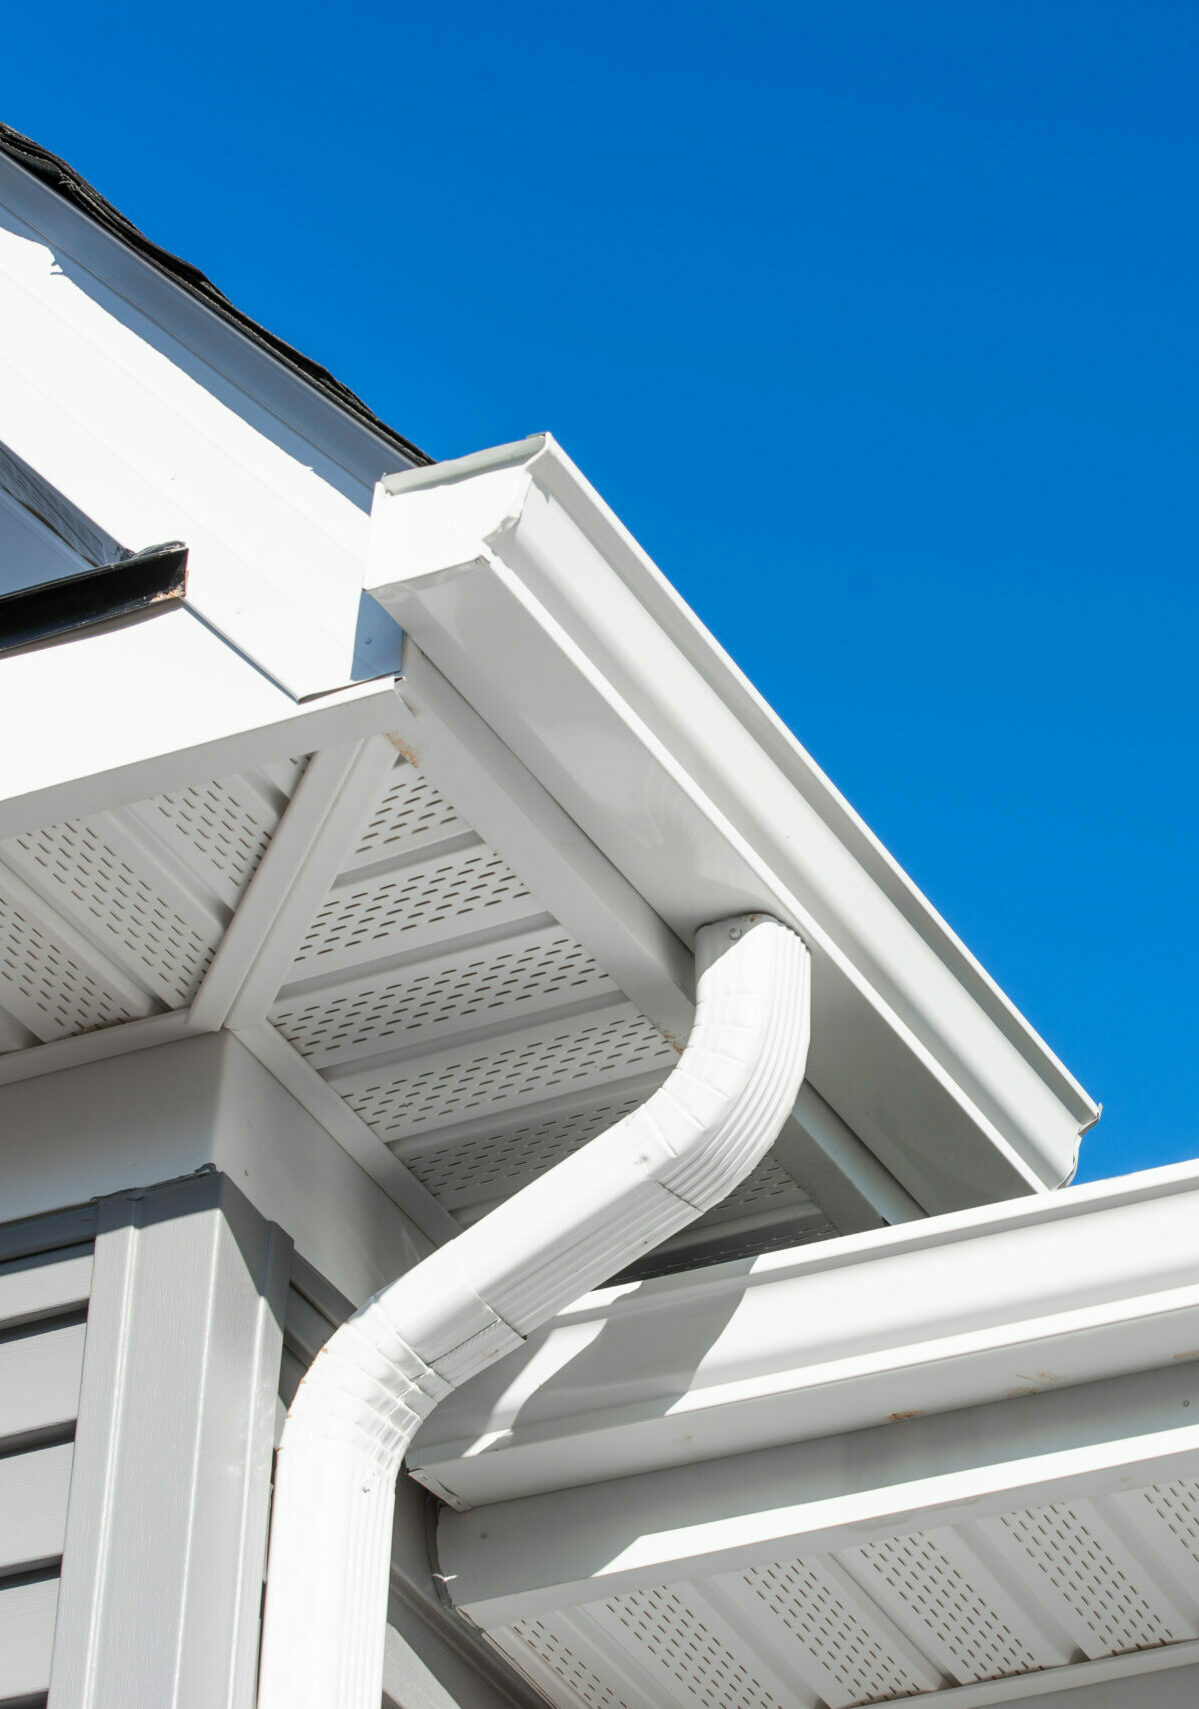 Discover top-notch Commercial Gutter Solutions in our guide. Elevate your business's exterior aesthetics and functionality today!